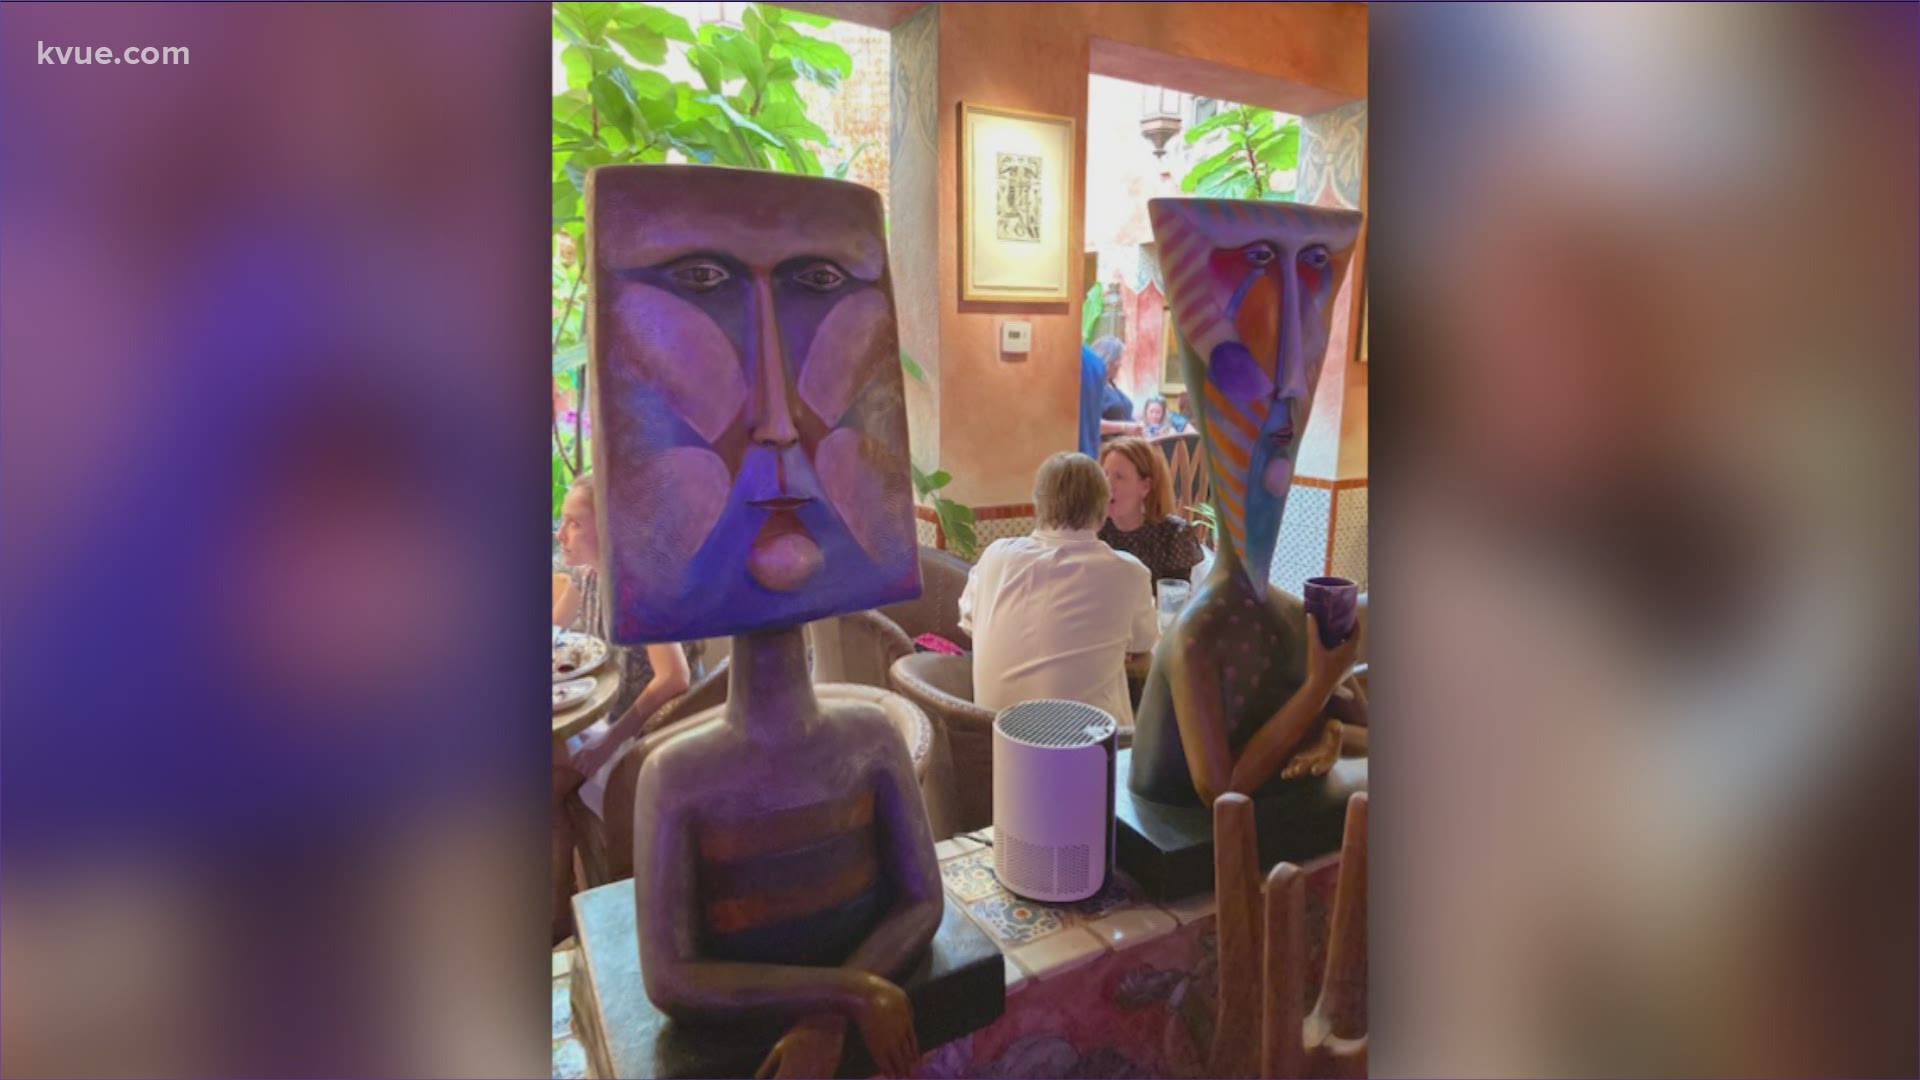 The owner is looking for help after a water fountain piece by famed Mexican artist Sergio Bustamante was stolen this week.